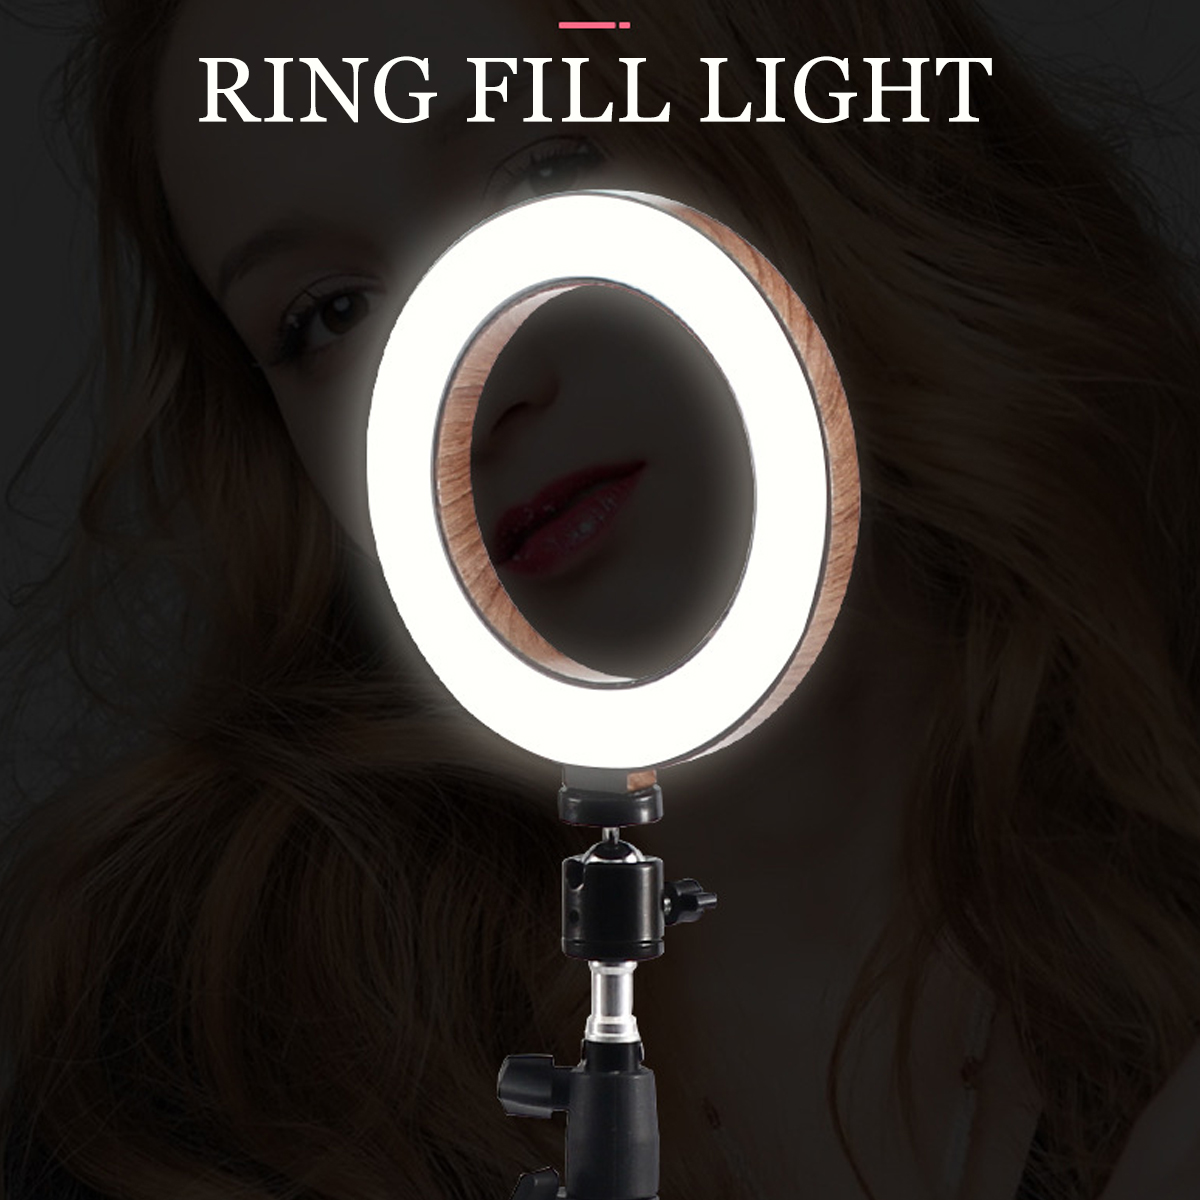 6-inch-LED-Ring-Light-Fill-Light-For-Makeup-Streaming-Selfie-Beauty-Photography-B-Makeup-Mirror-Ligh-1635732-12